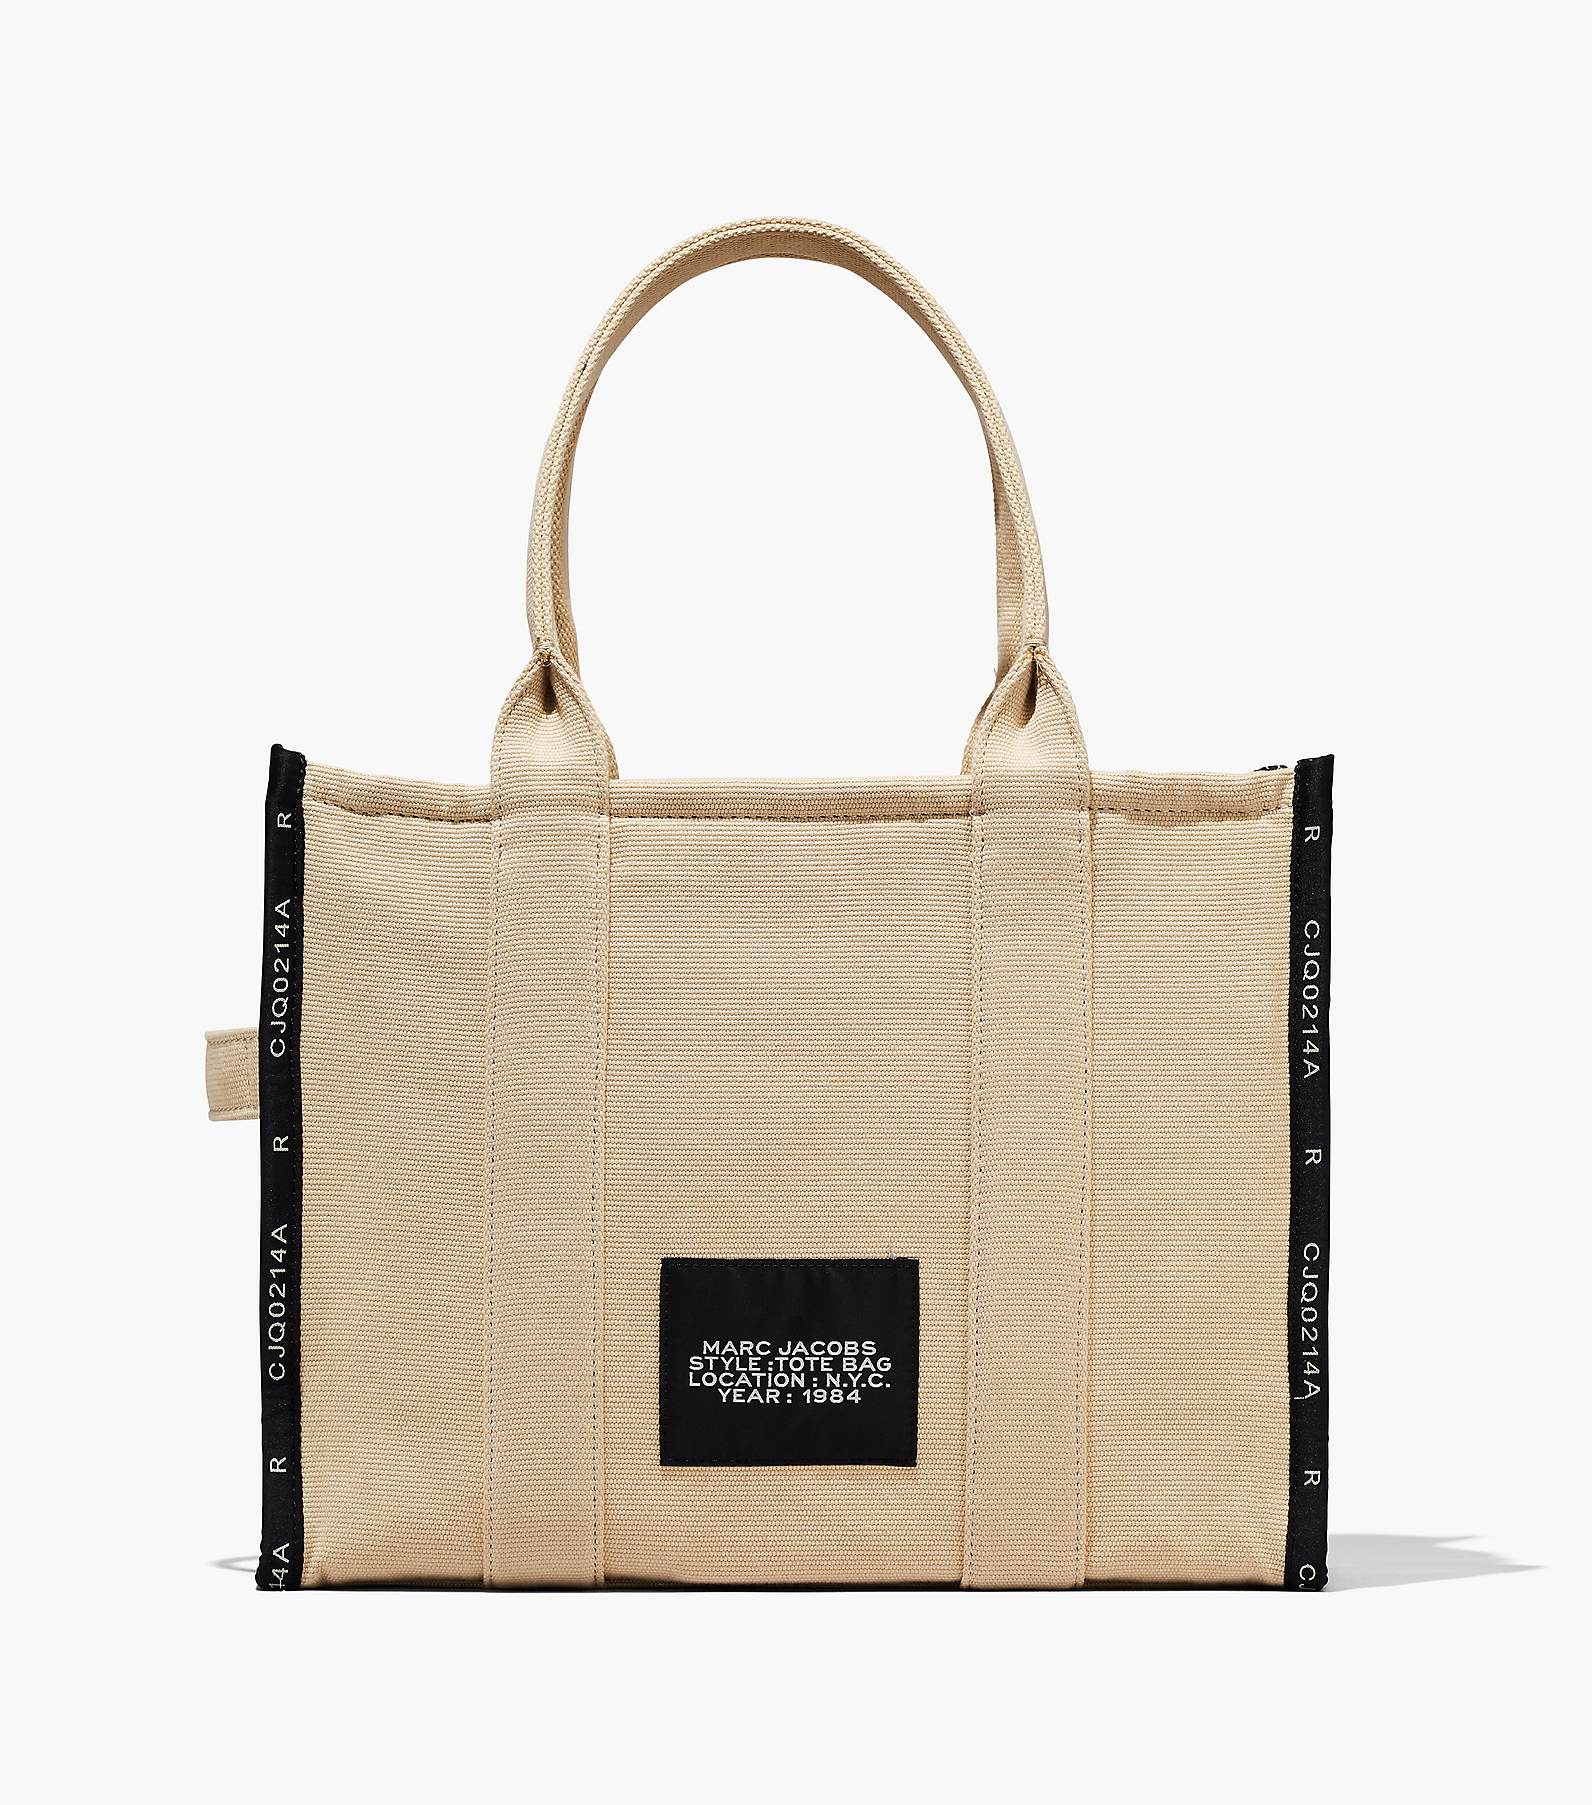 The Tote Bag MARC JACOBS Women's